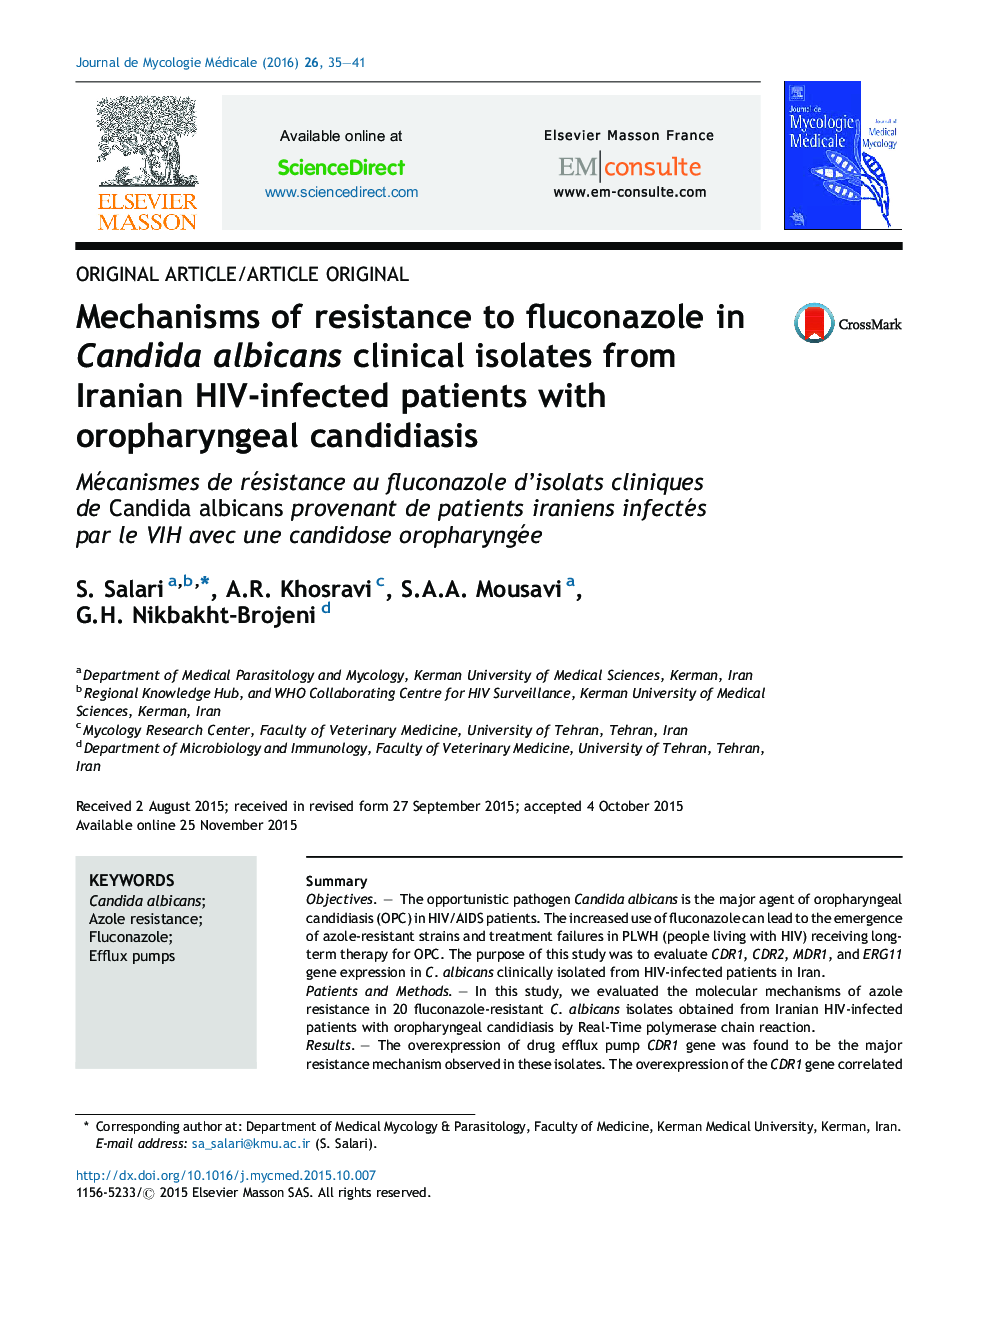 Mechanisms of resistance to fluconazole in Candida albicans clinical isolates from Iranian HIV-infected patients with oropharyngeal candidiasis